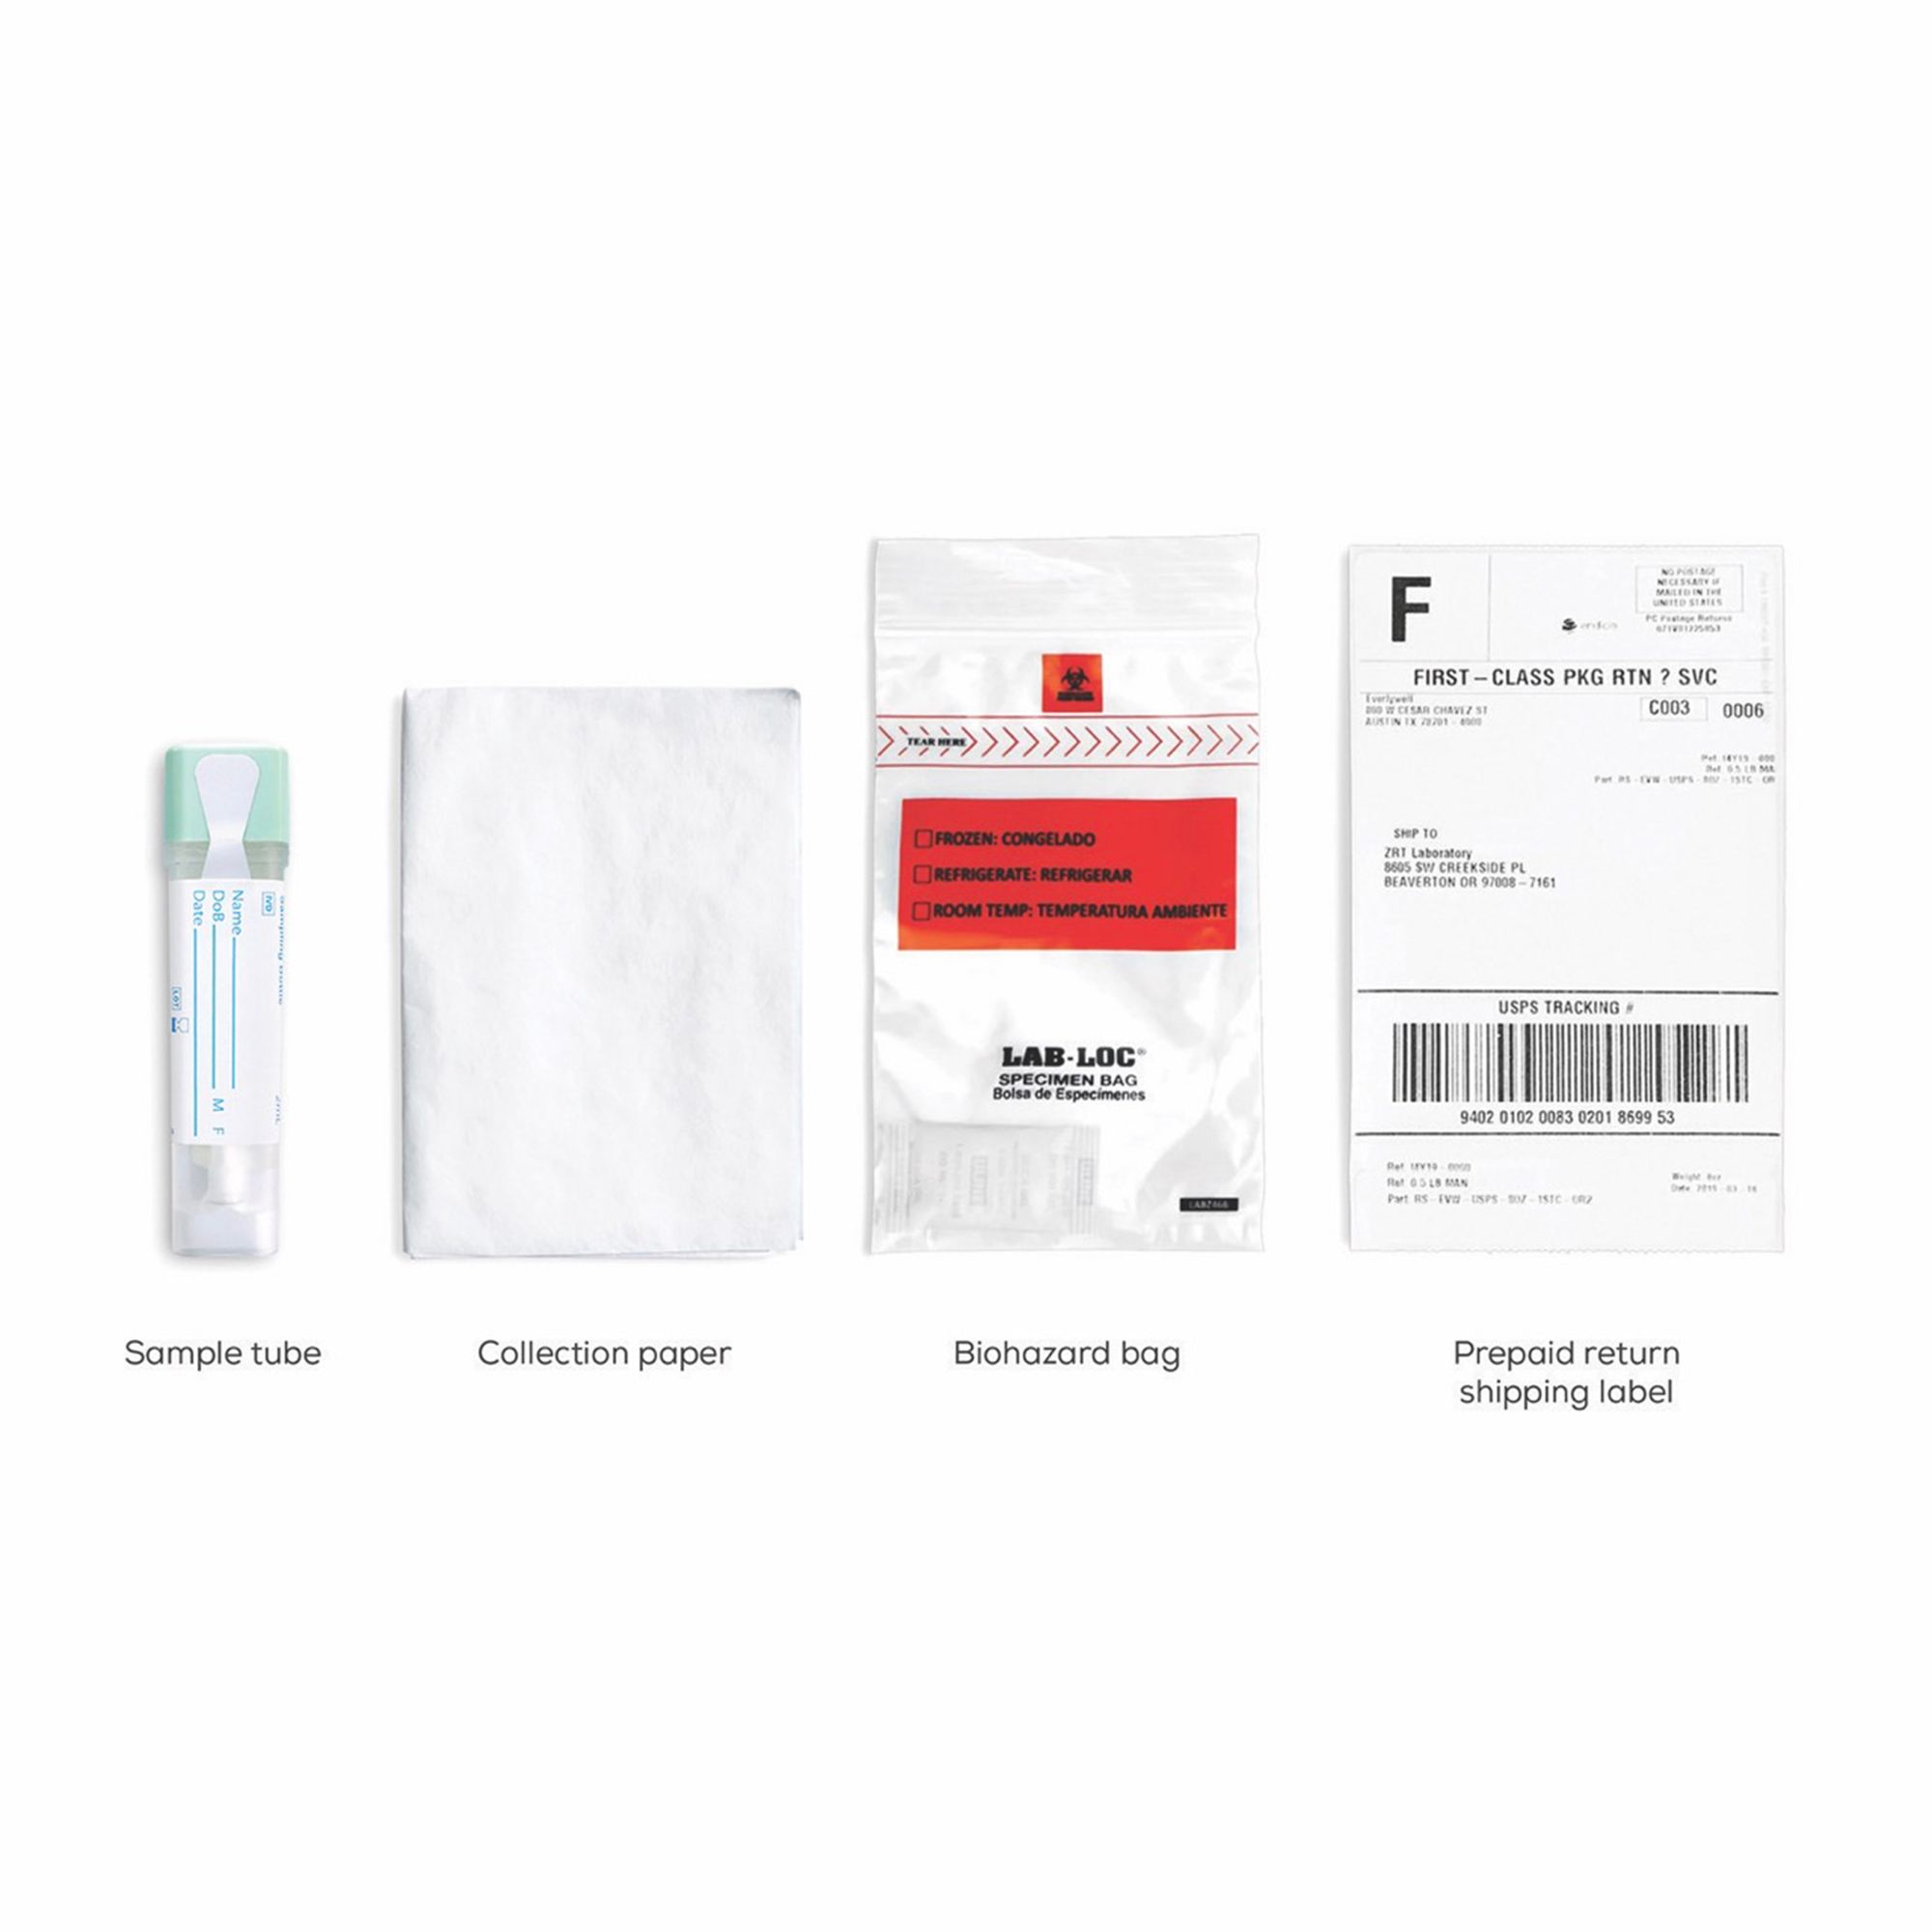 Everlywell FIT Colon Cancer Screening Test - 1 Test Kit